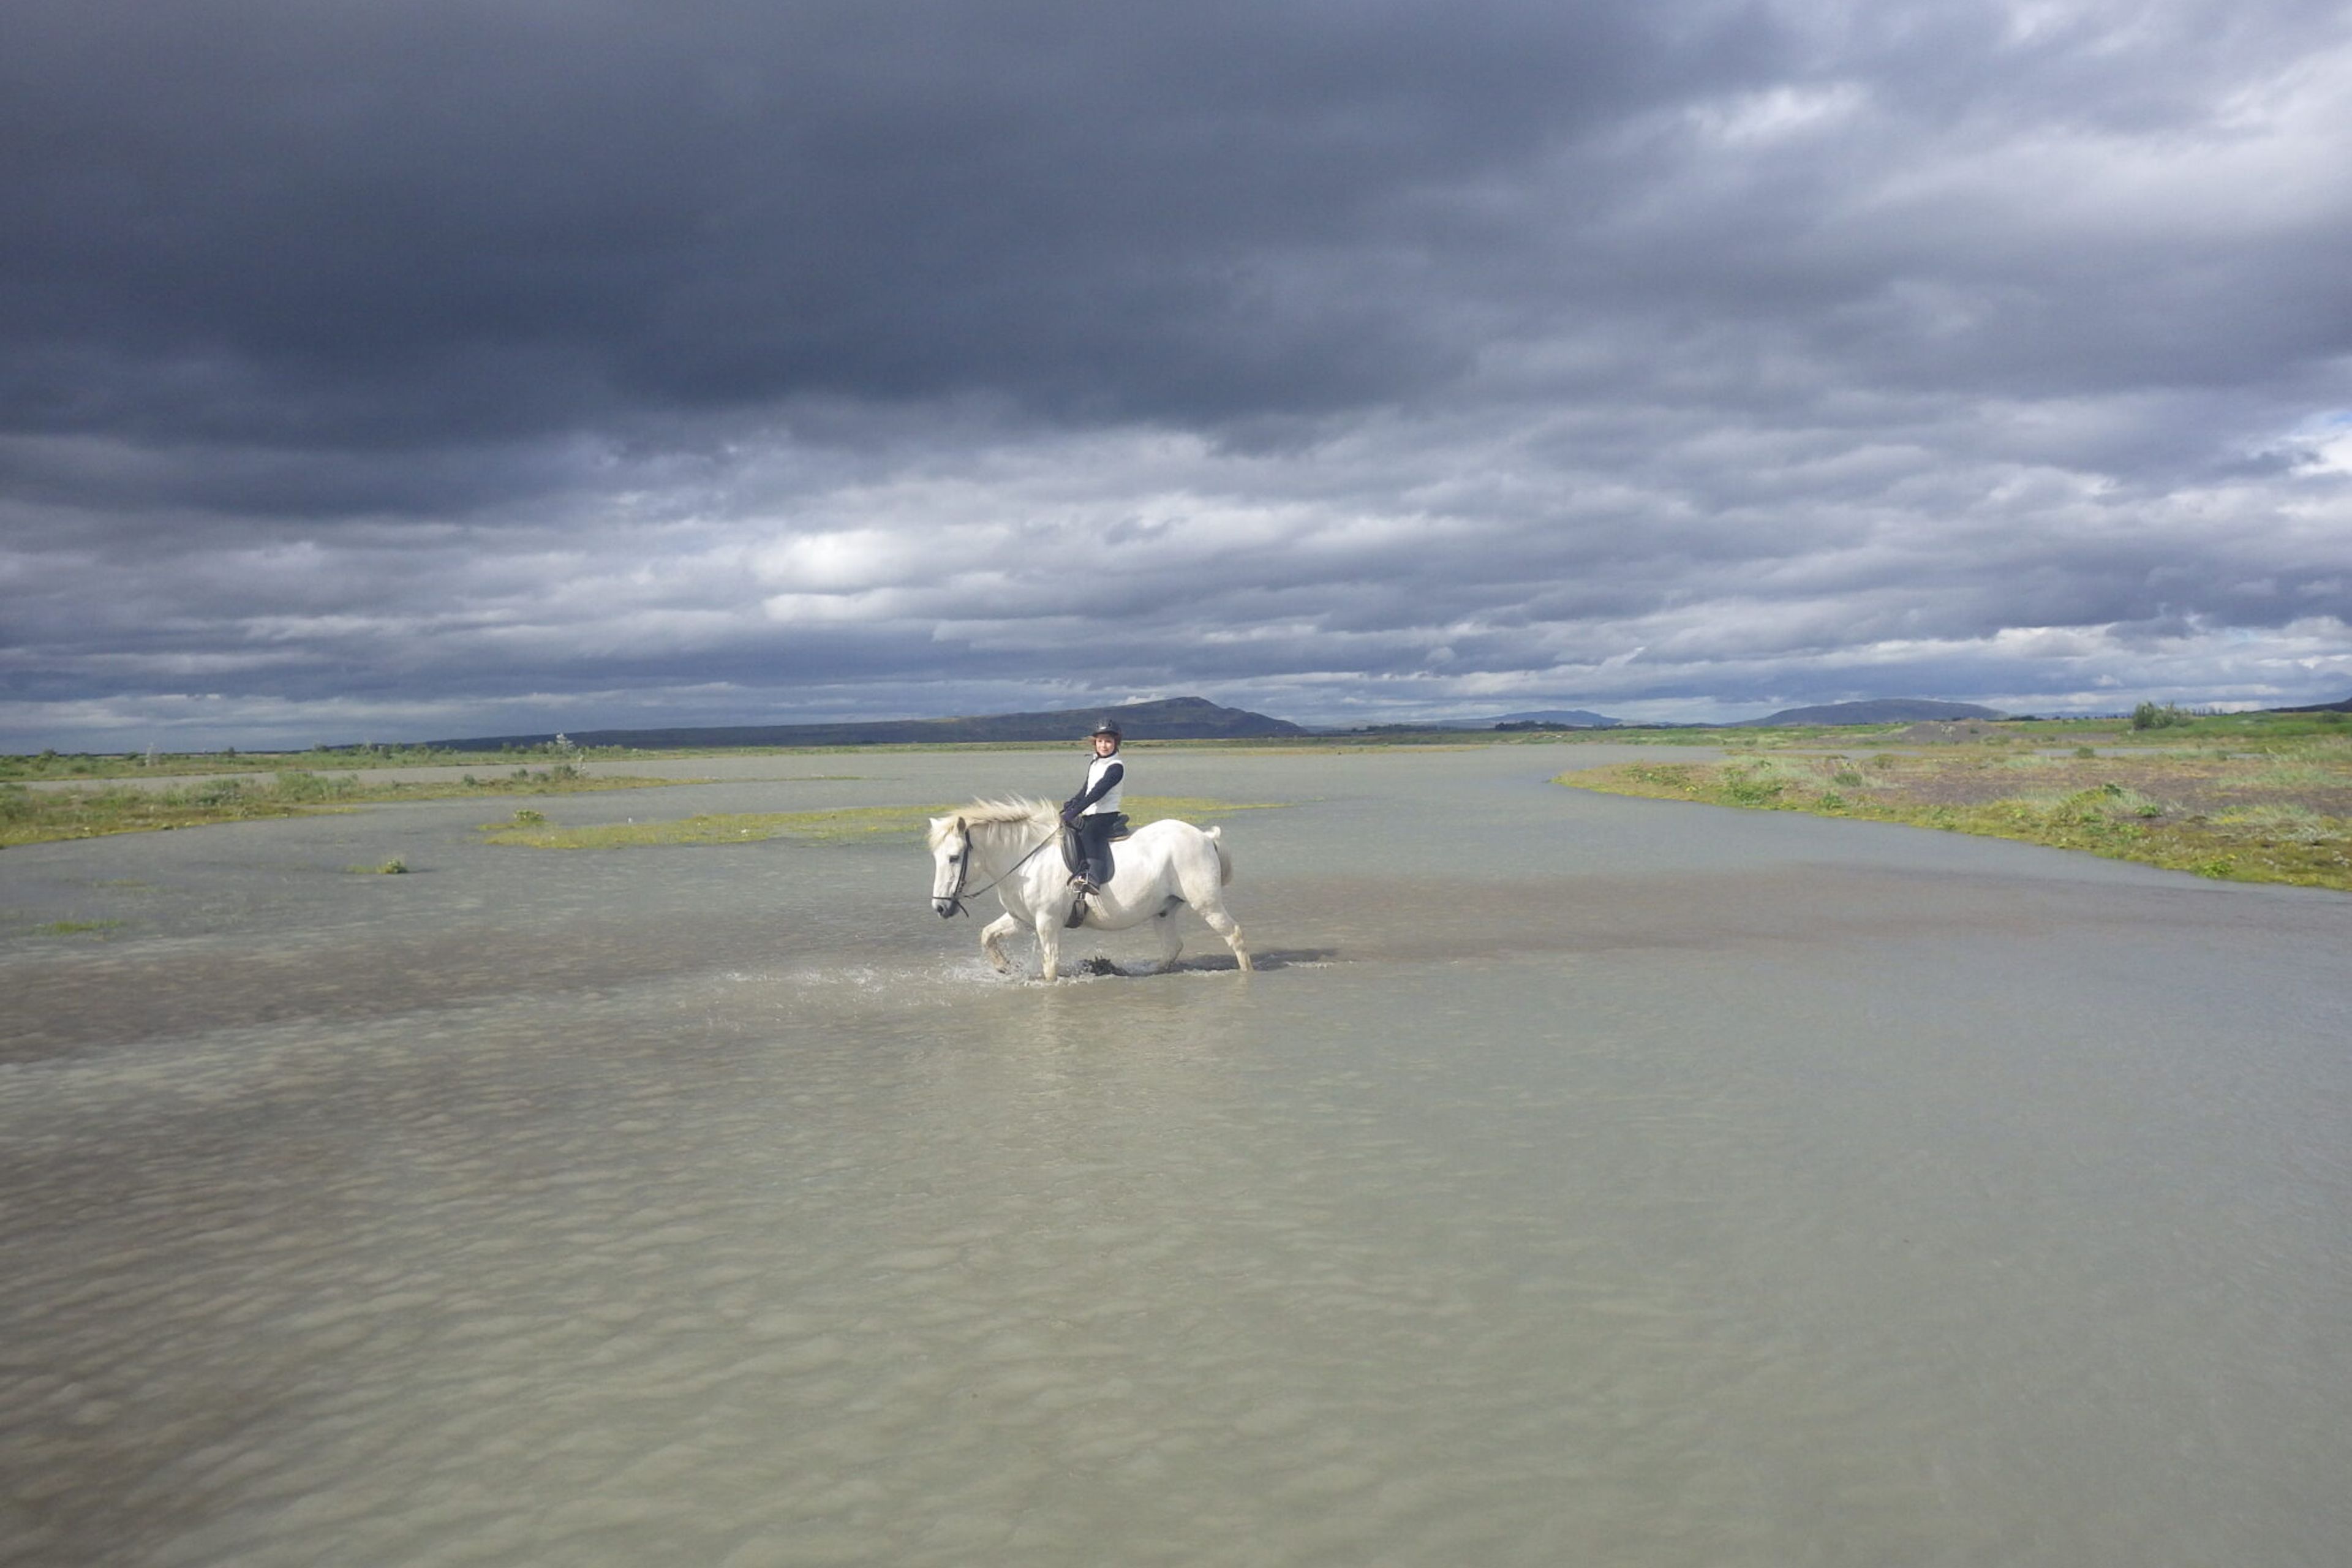 One rider on its horse crossing a river 